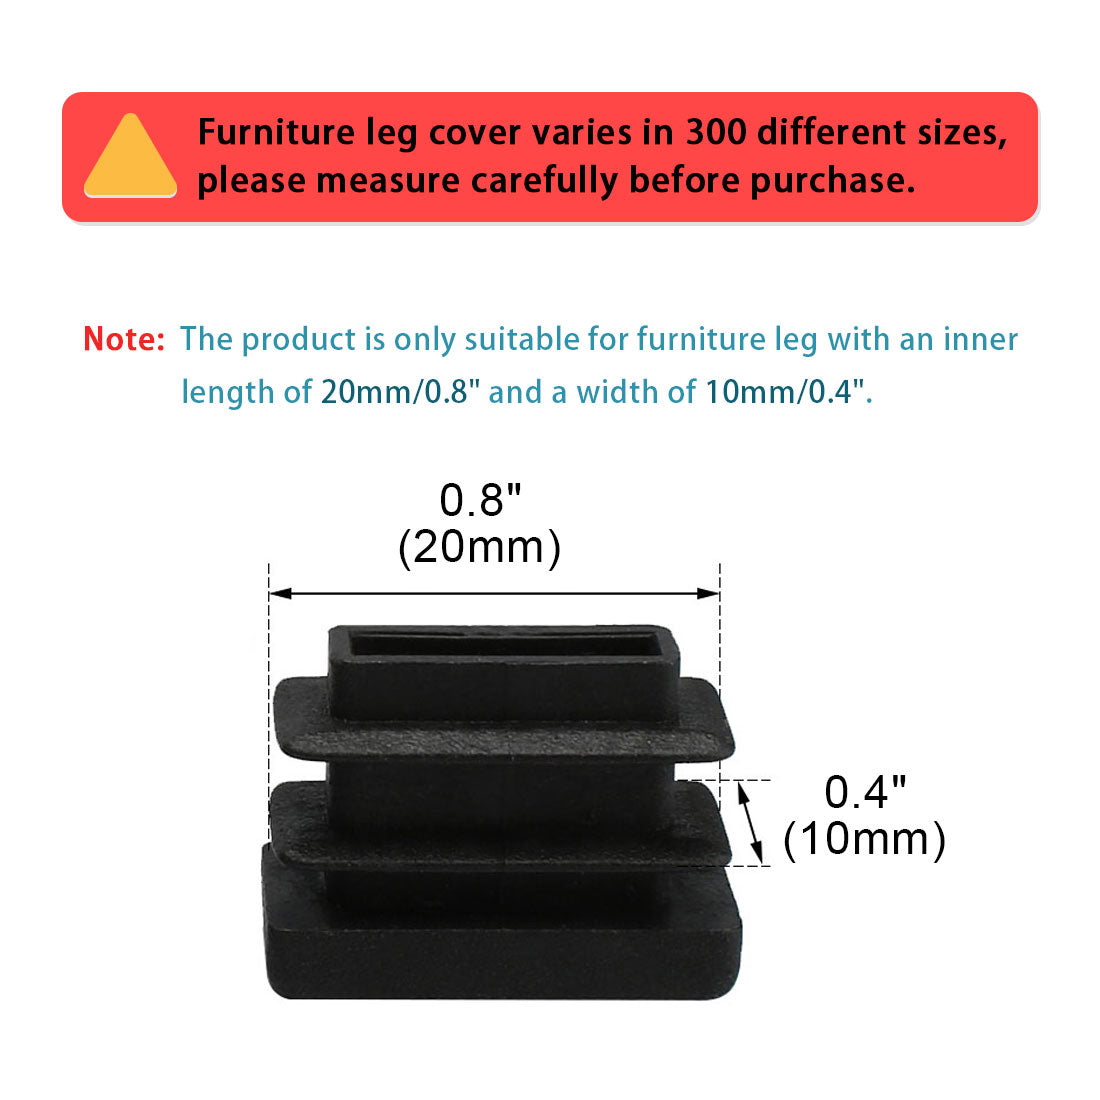 uxcell Uxcell Home Plastic Rectangle Chair Desk Leg Foot Cover Tube Insert Black 20mm x 10mm 15pcs